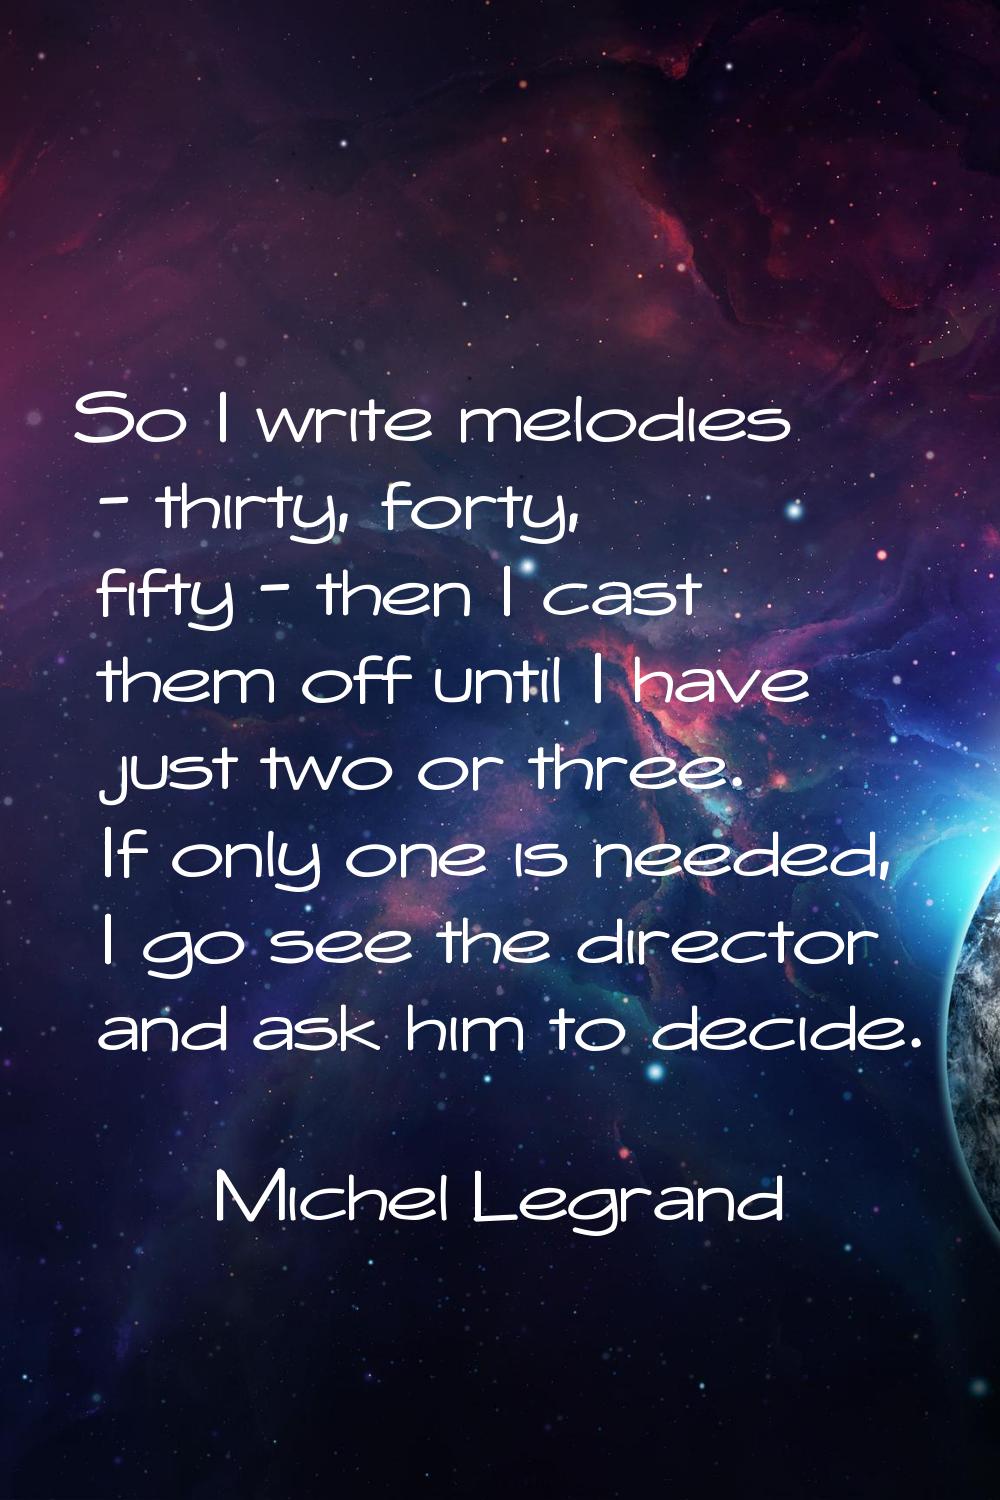 So I write melodies - thirty, forty, fifty - then I cast them off until I have just two or three. I